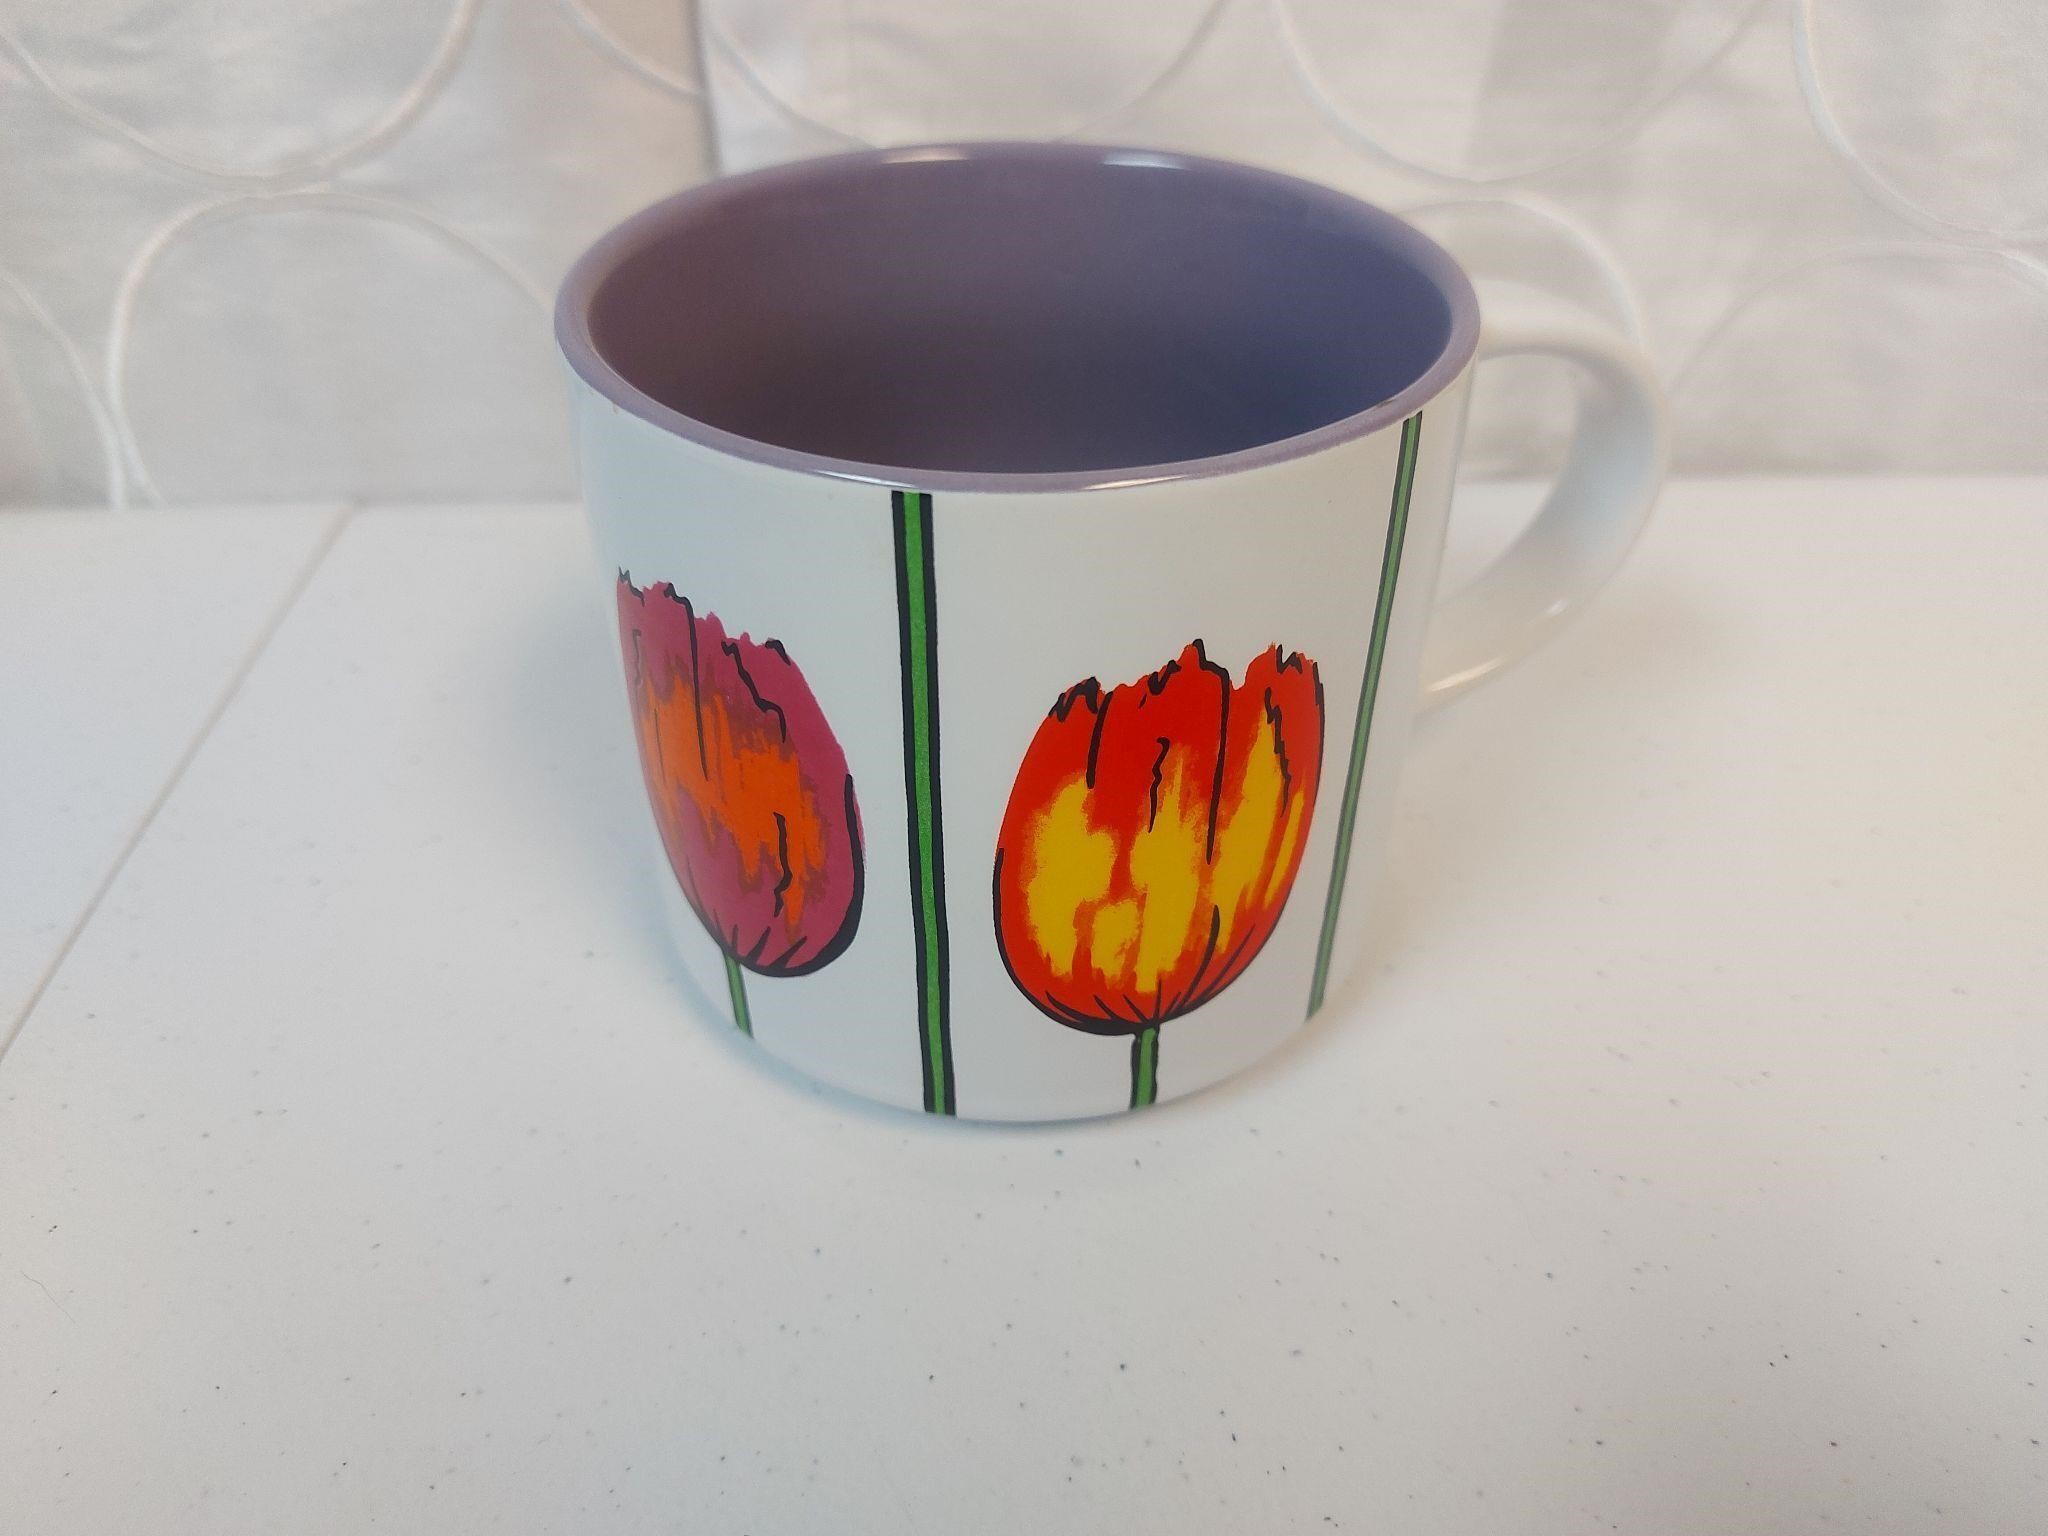 Flower Mug, New or Like New Condition